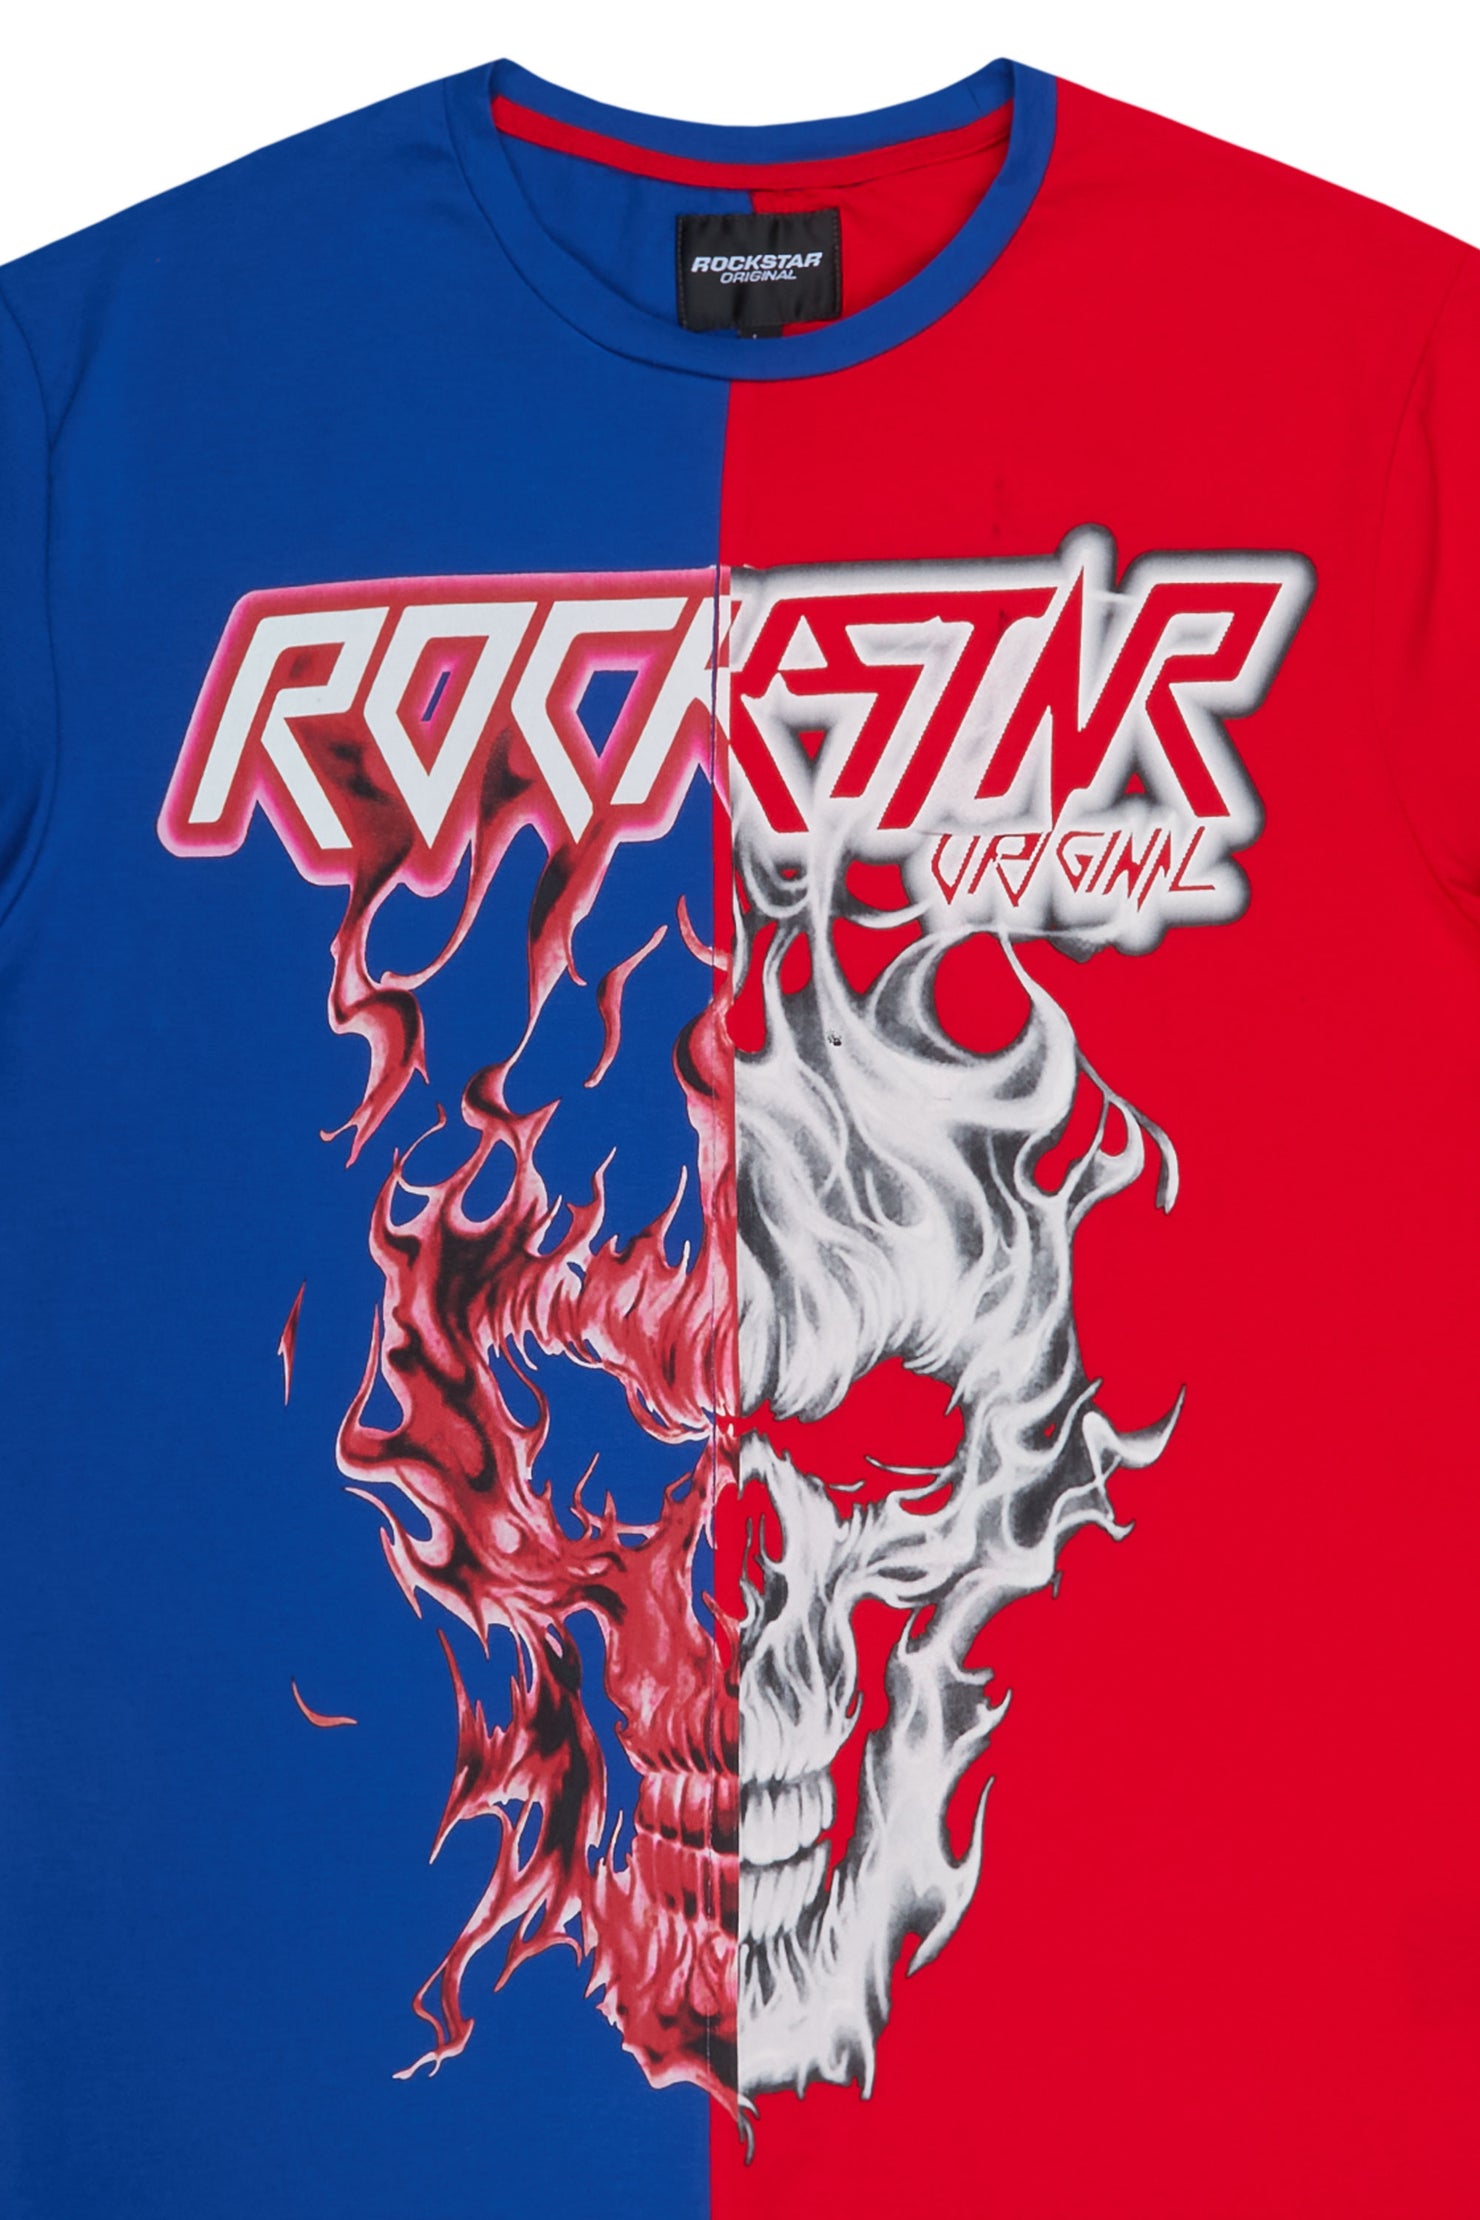 Troy Blue/Red Graphic T-Shirt